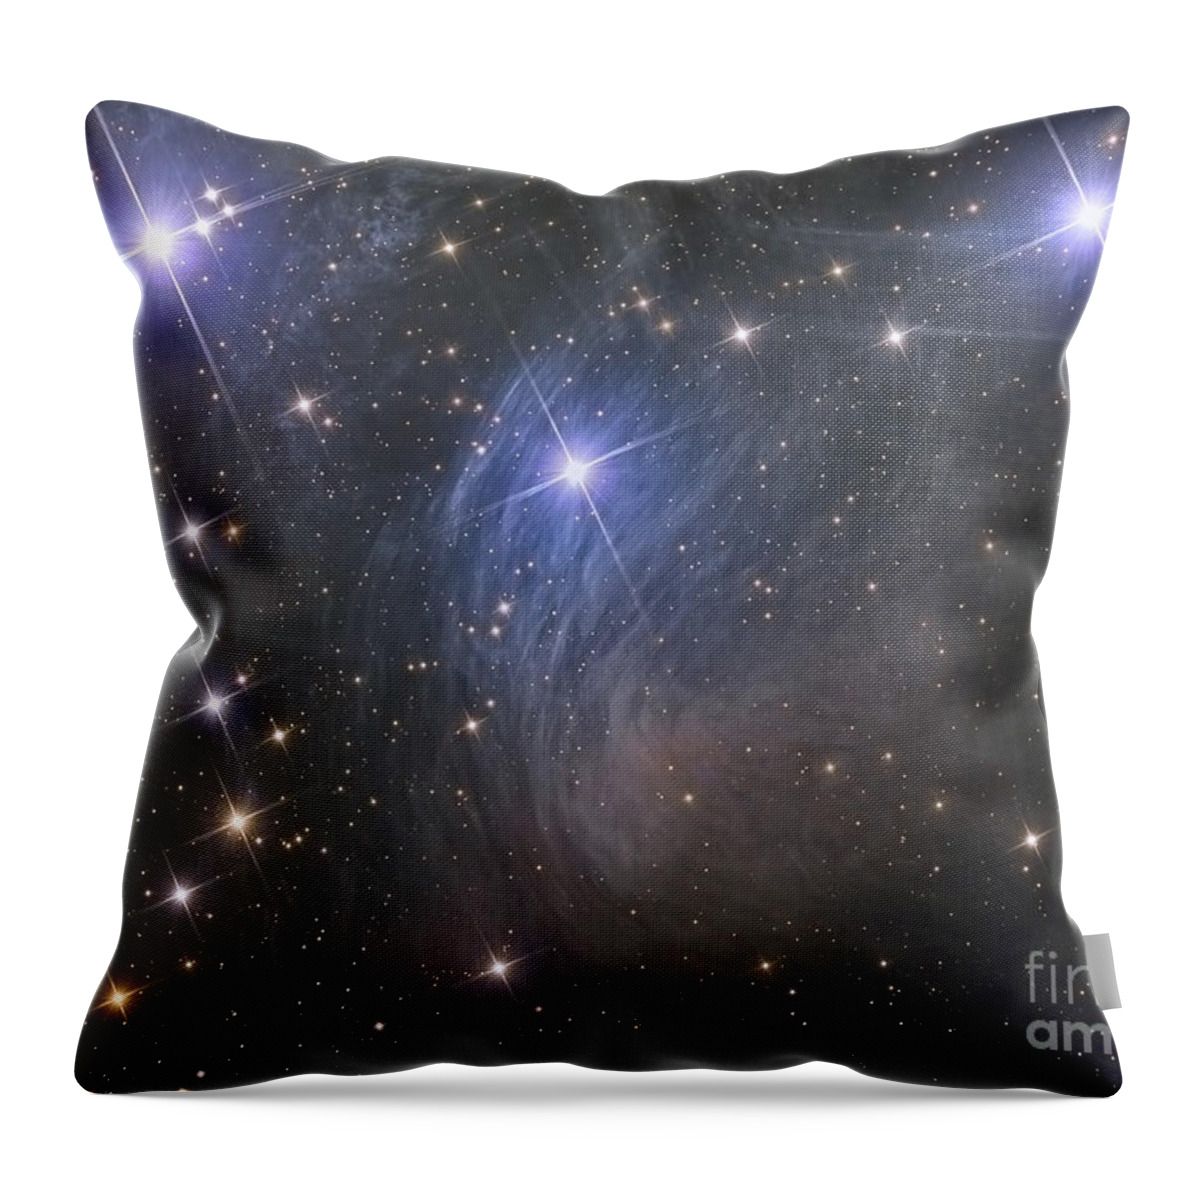 Stars Throw Pillow featuring the photograph Messier 45, The Pleiades, An Open Star by Reinhold Wittich